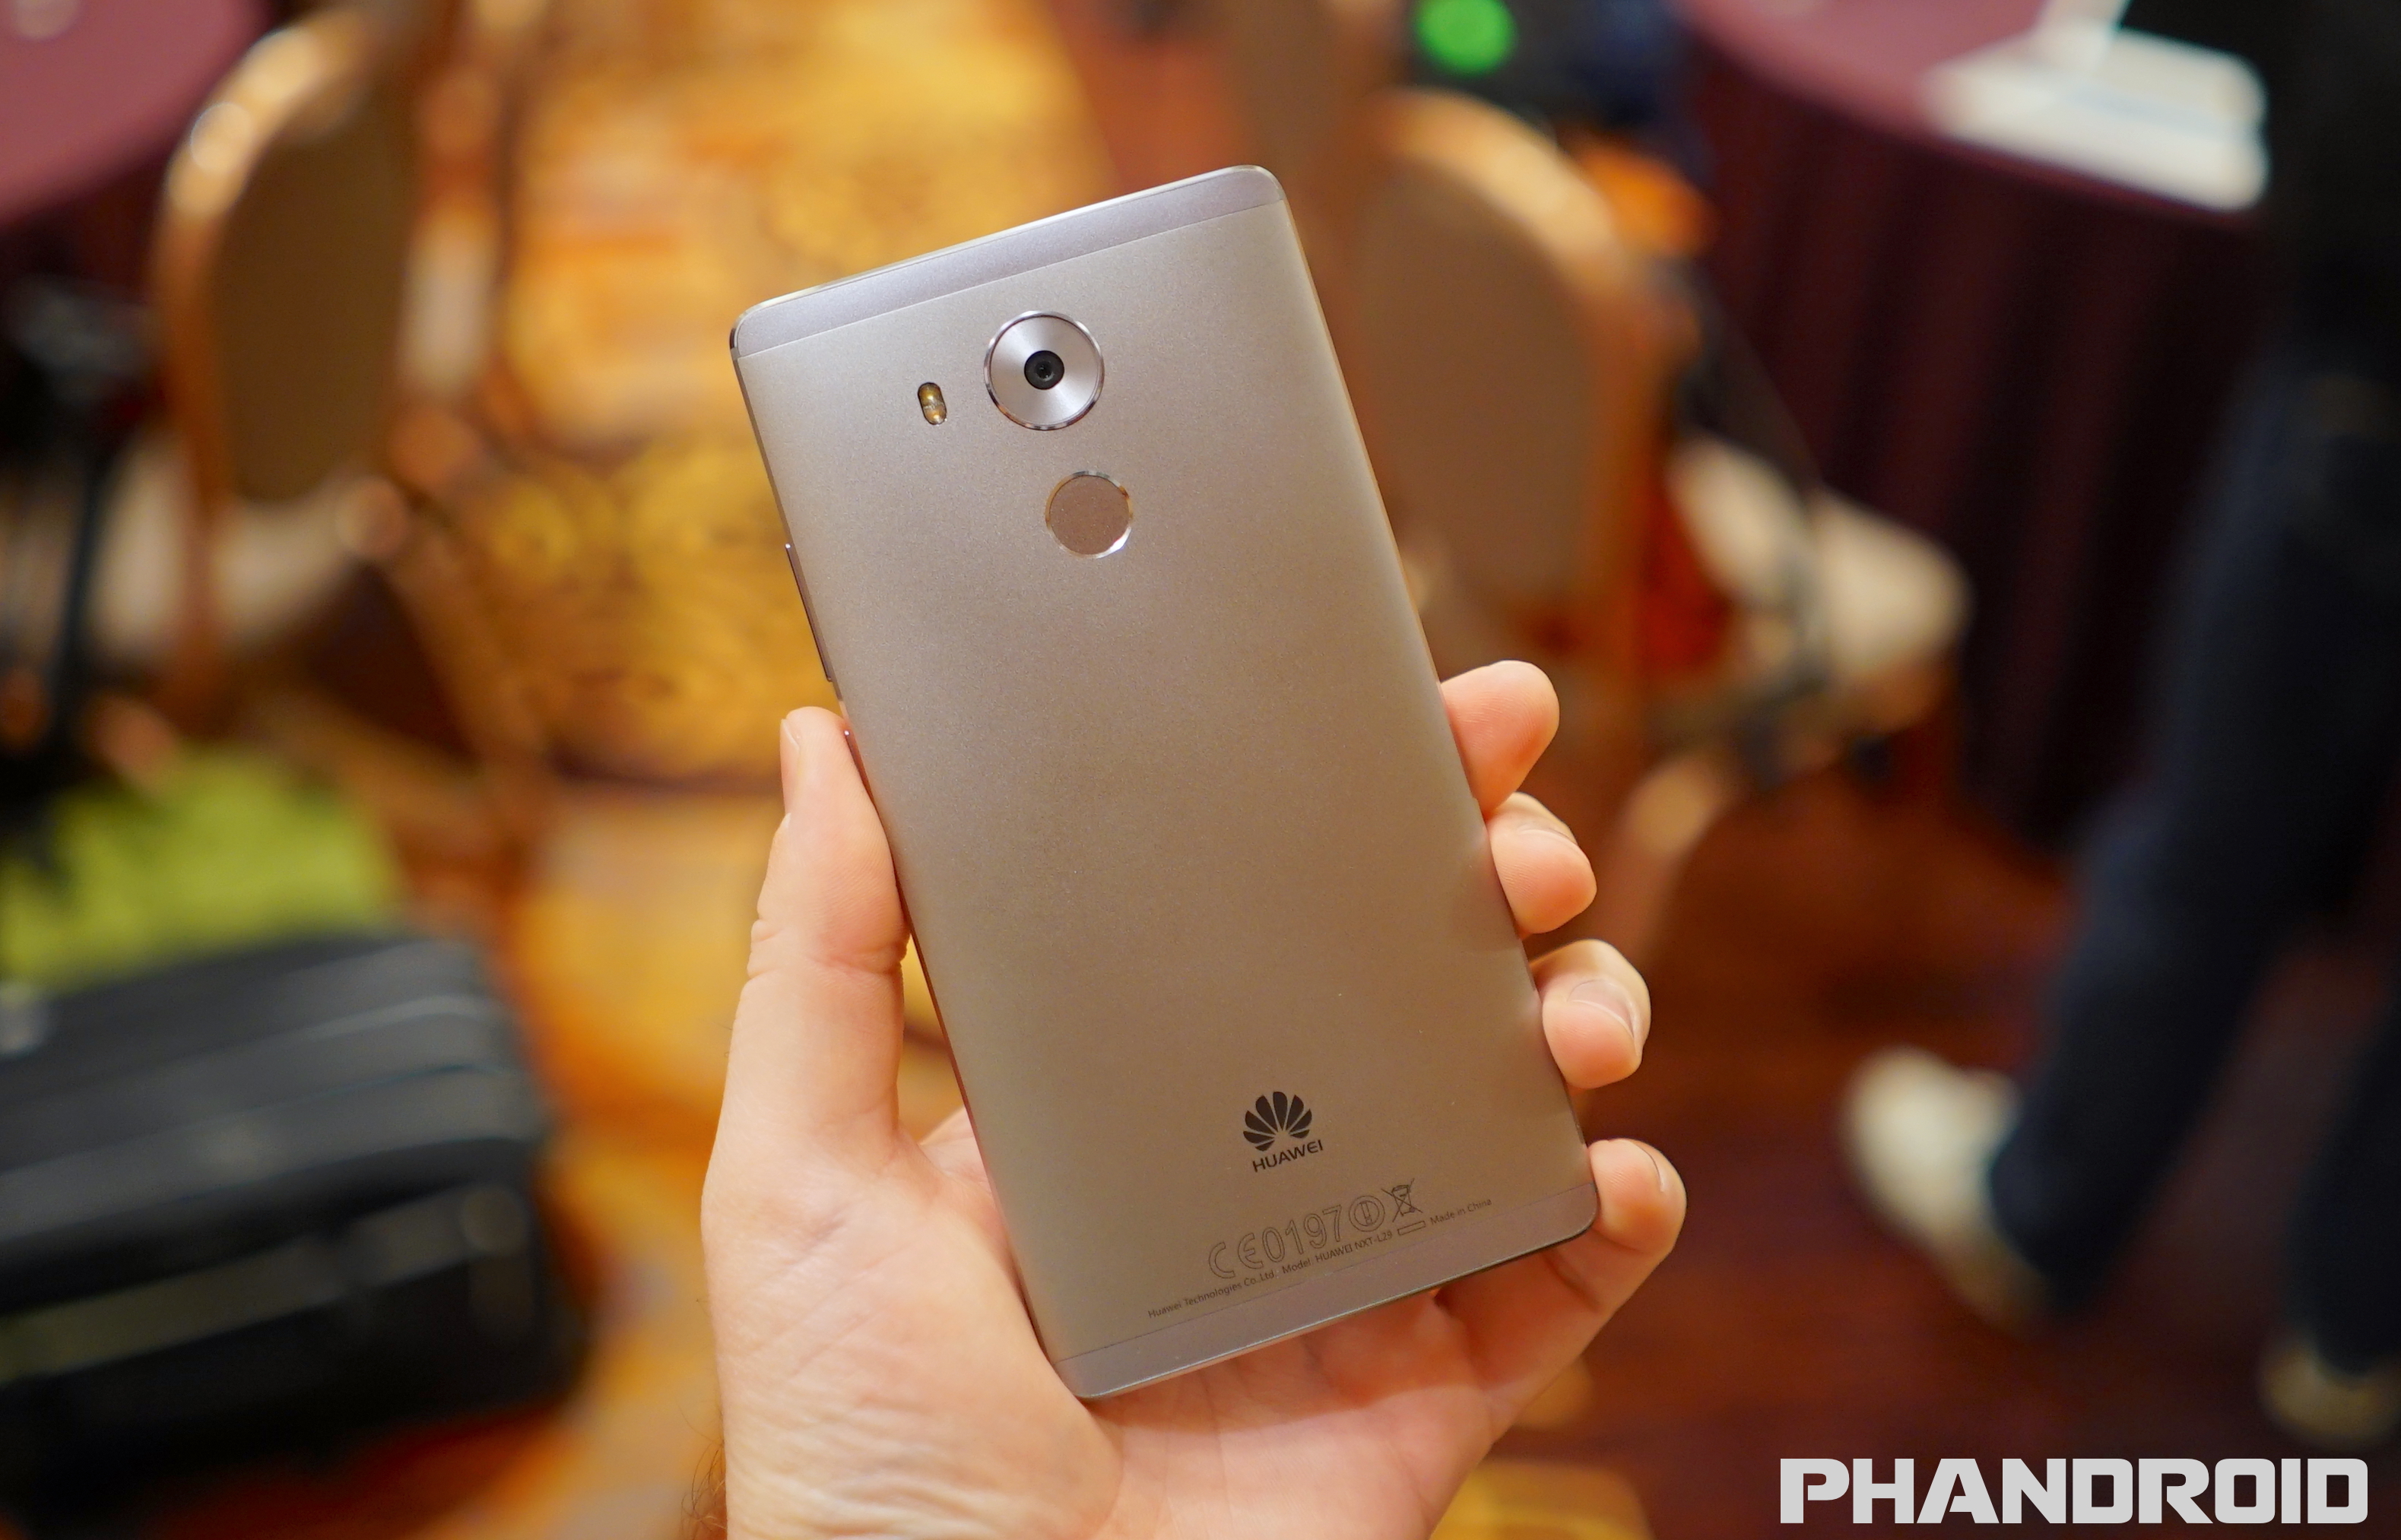 kabel Rusland Vlieger 14 first things every Huawei Mate 8 user should do – Phandroid